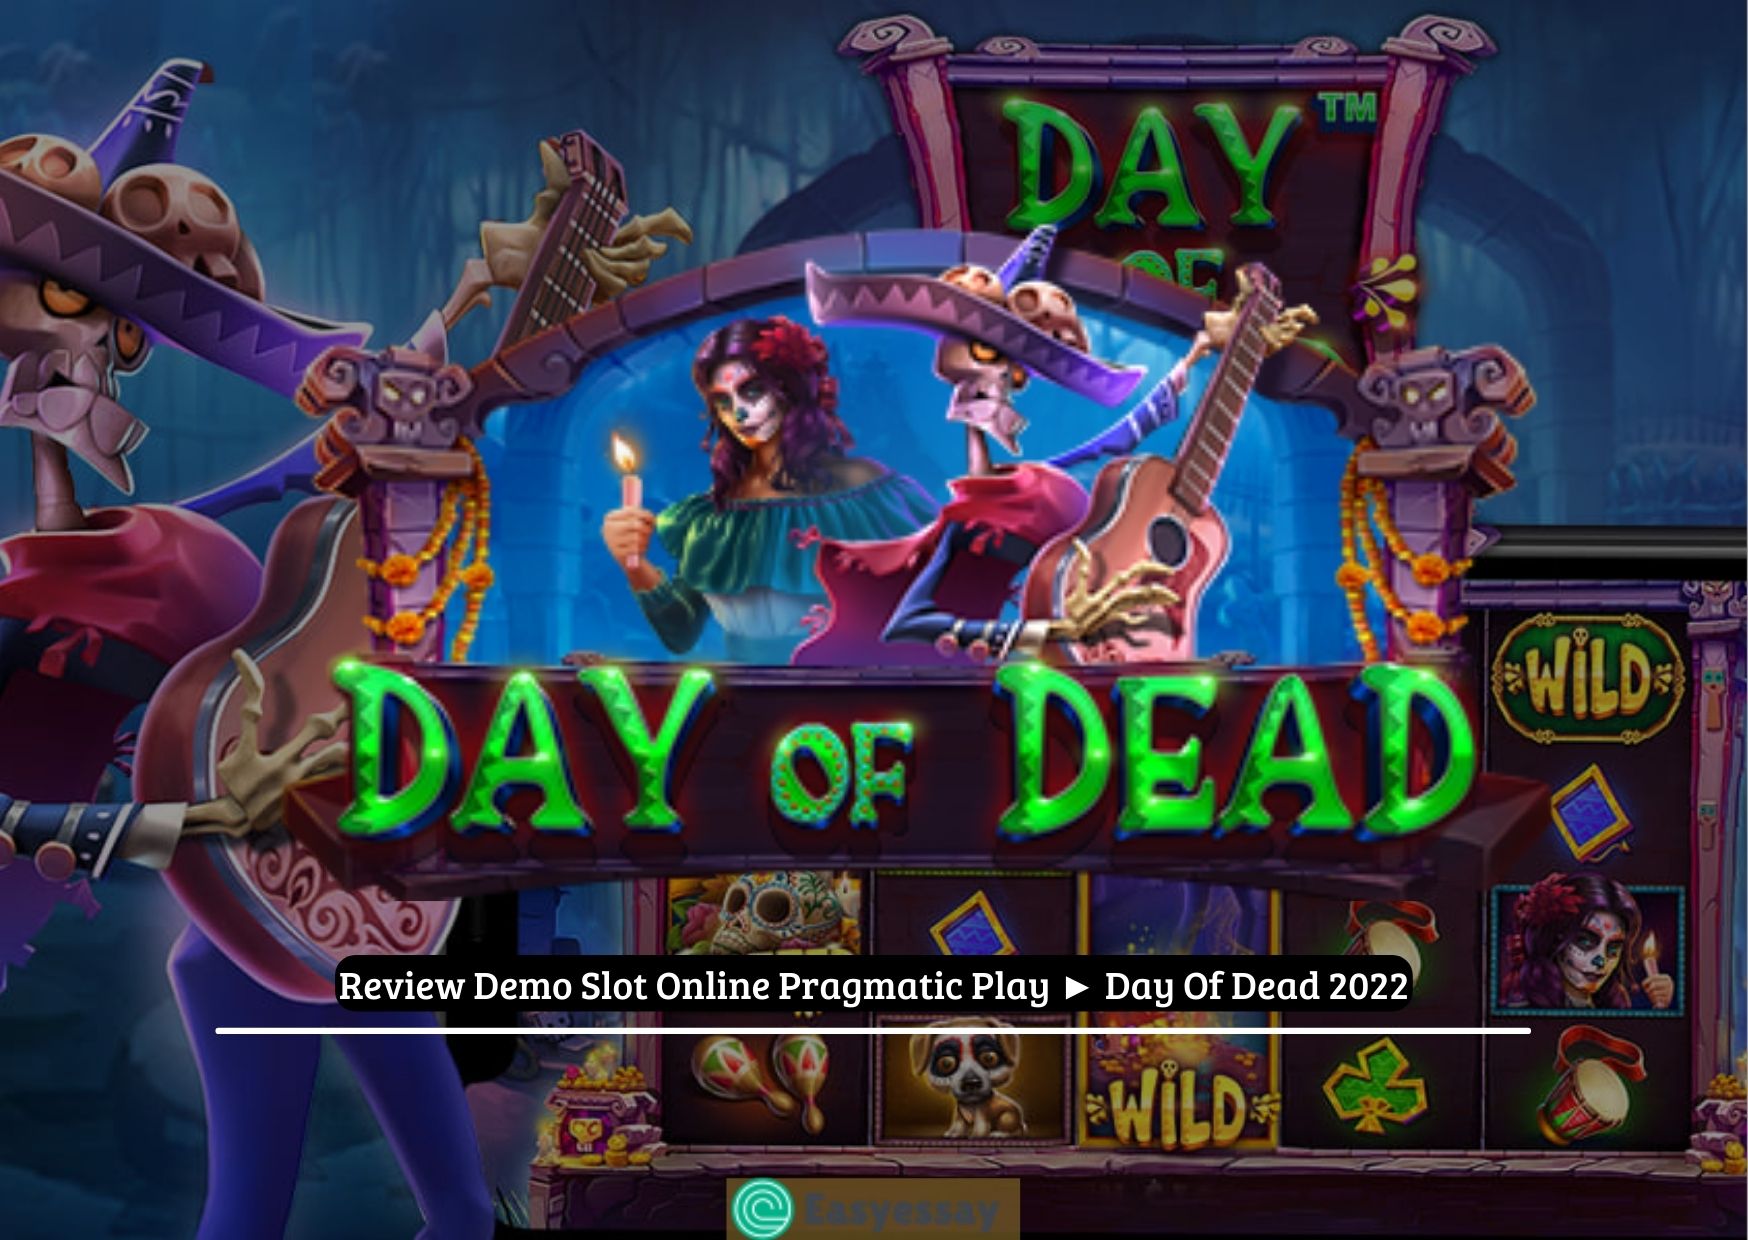 Review Demo Slot Online Pragmatic Play ► Day Of Dead 2022